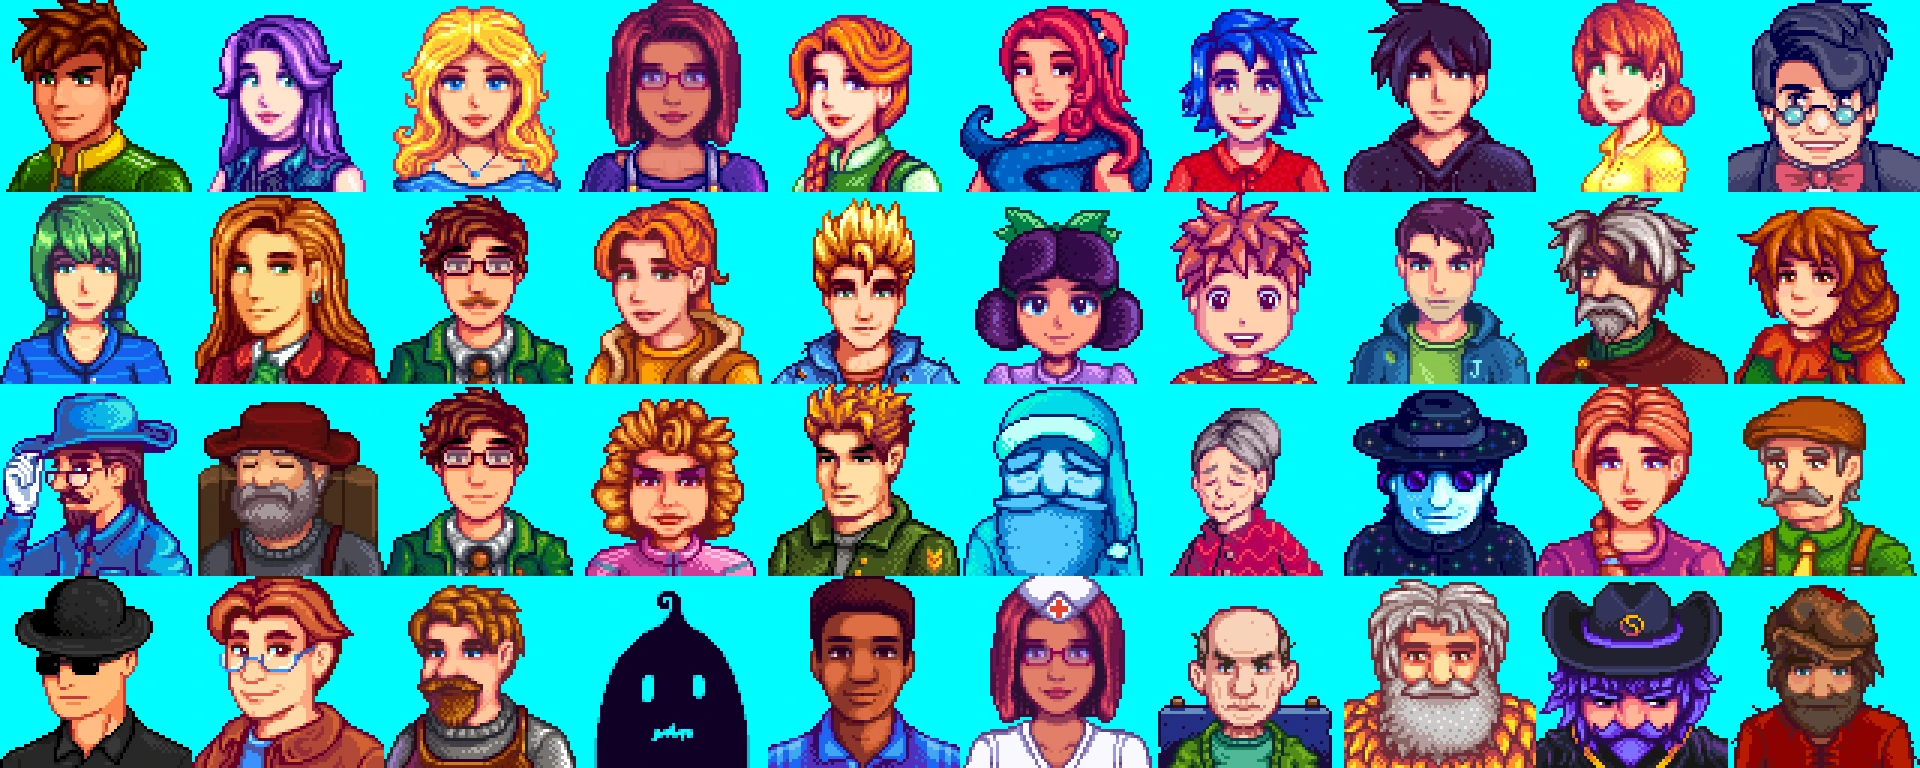 Slightly Edited Portraits at Stardew Valley Nexus - Mods and community. sou...